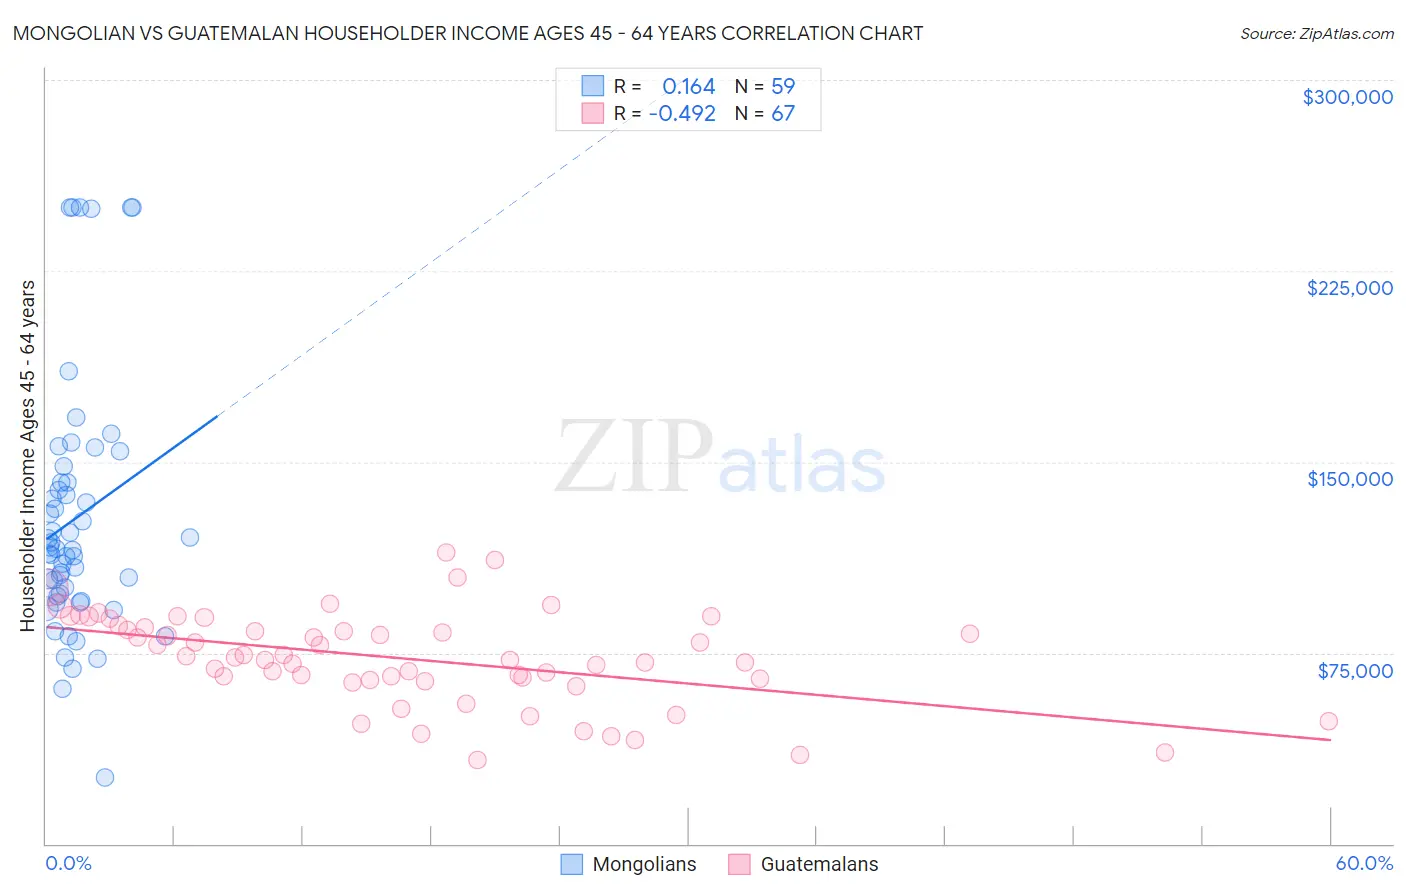 Mongolian vs Guatemalan Householder Income Ages 45 - 64 years